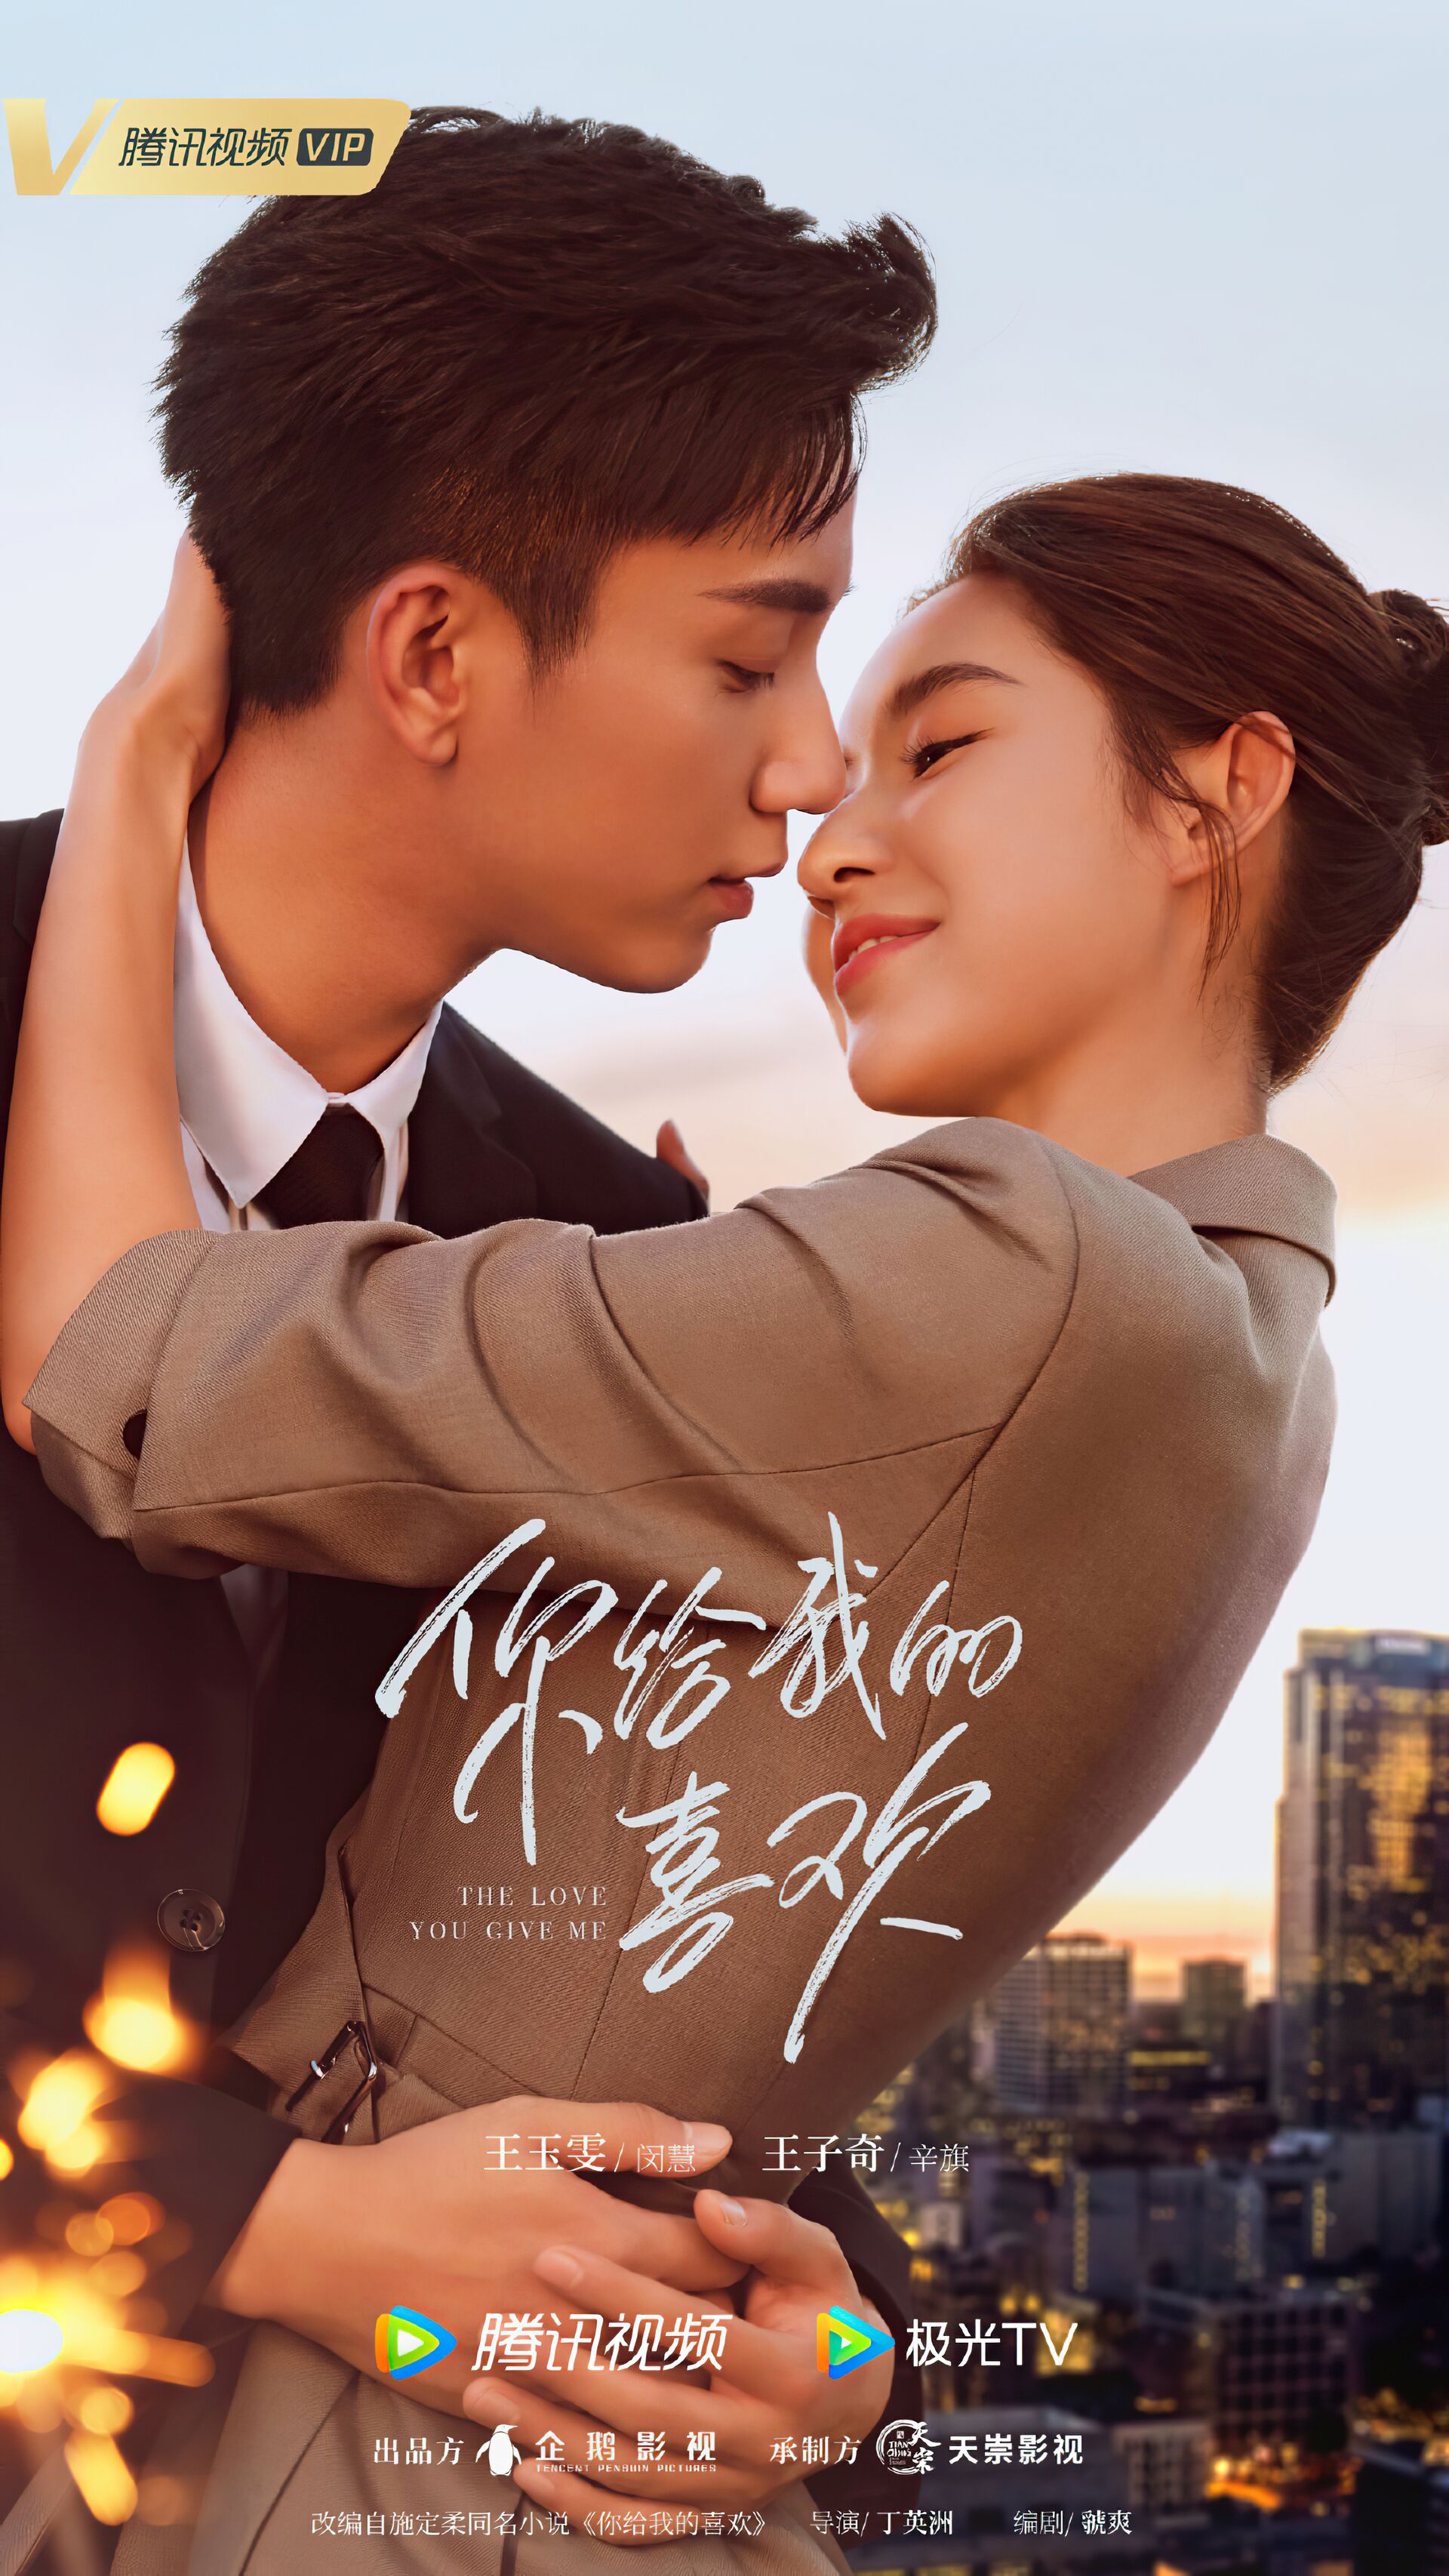 The Love You Give Me with Wang Yuwen